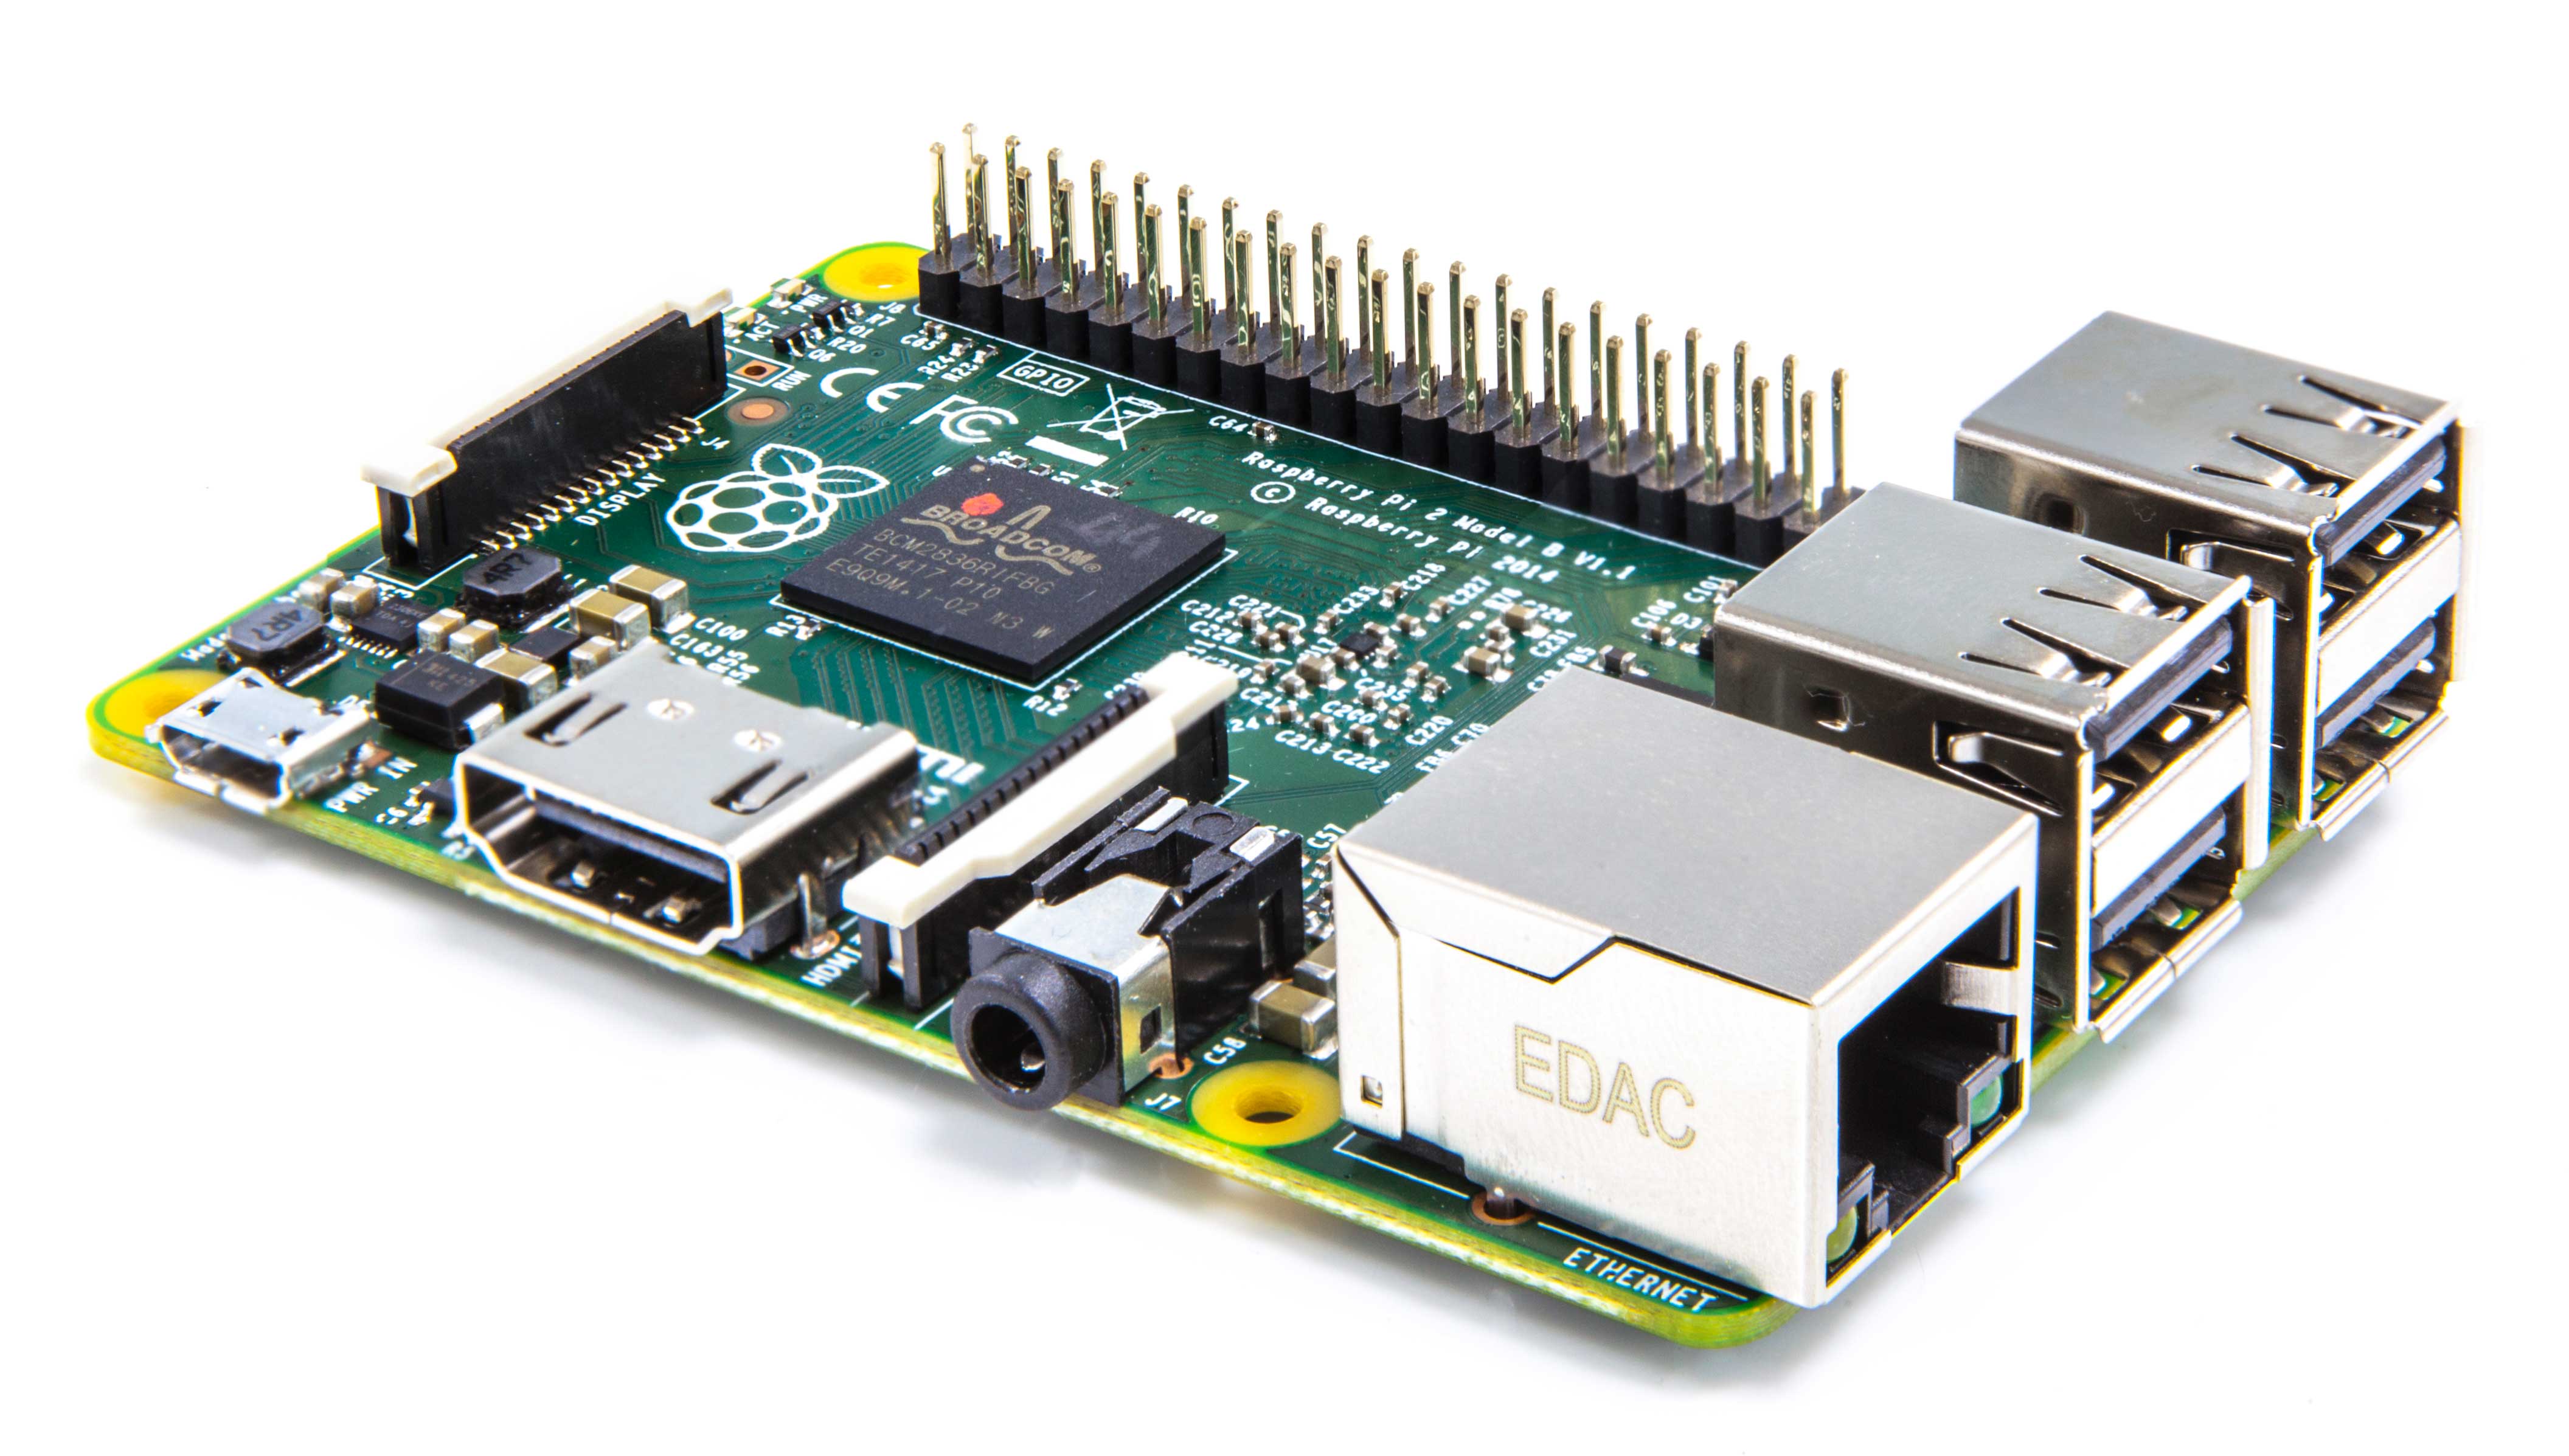 Getting started with Raspberry-Pi